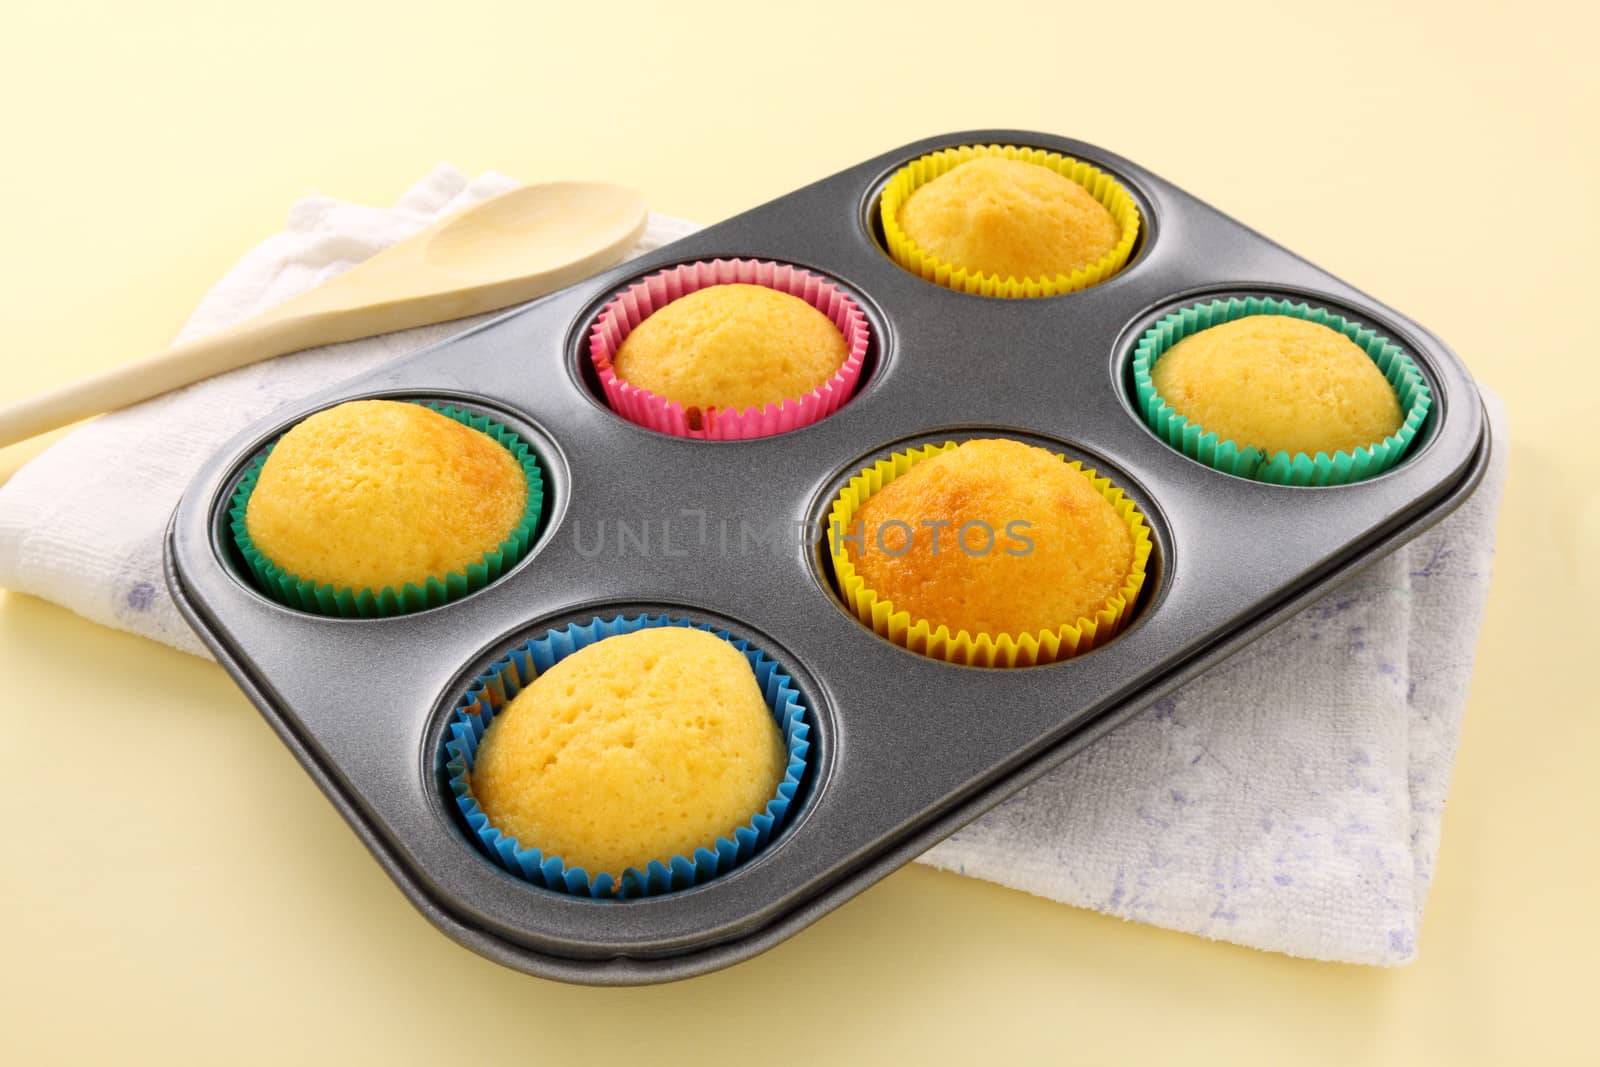 Fresh baked cup cakes straight from the oven.